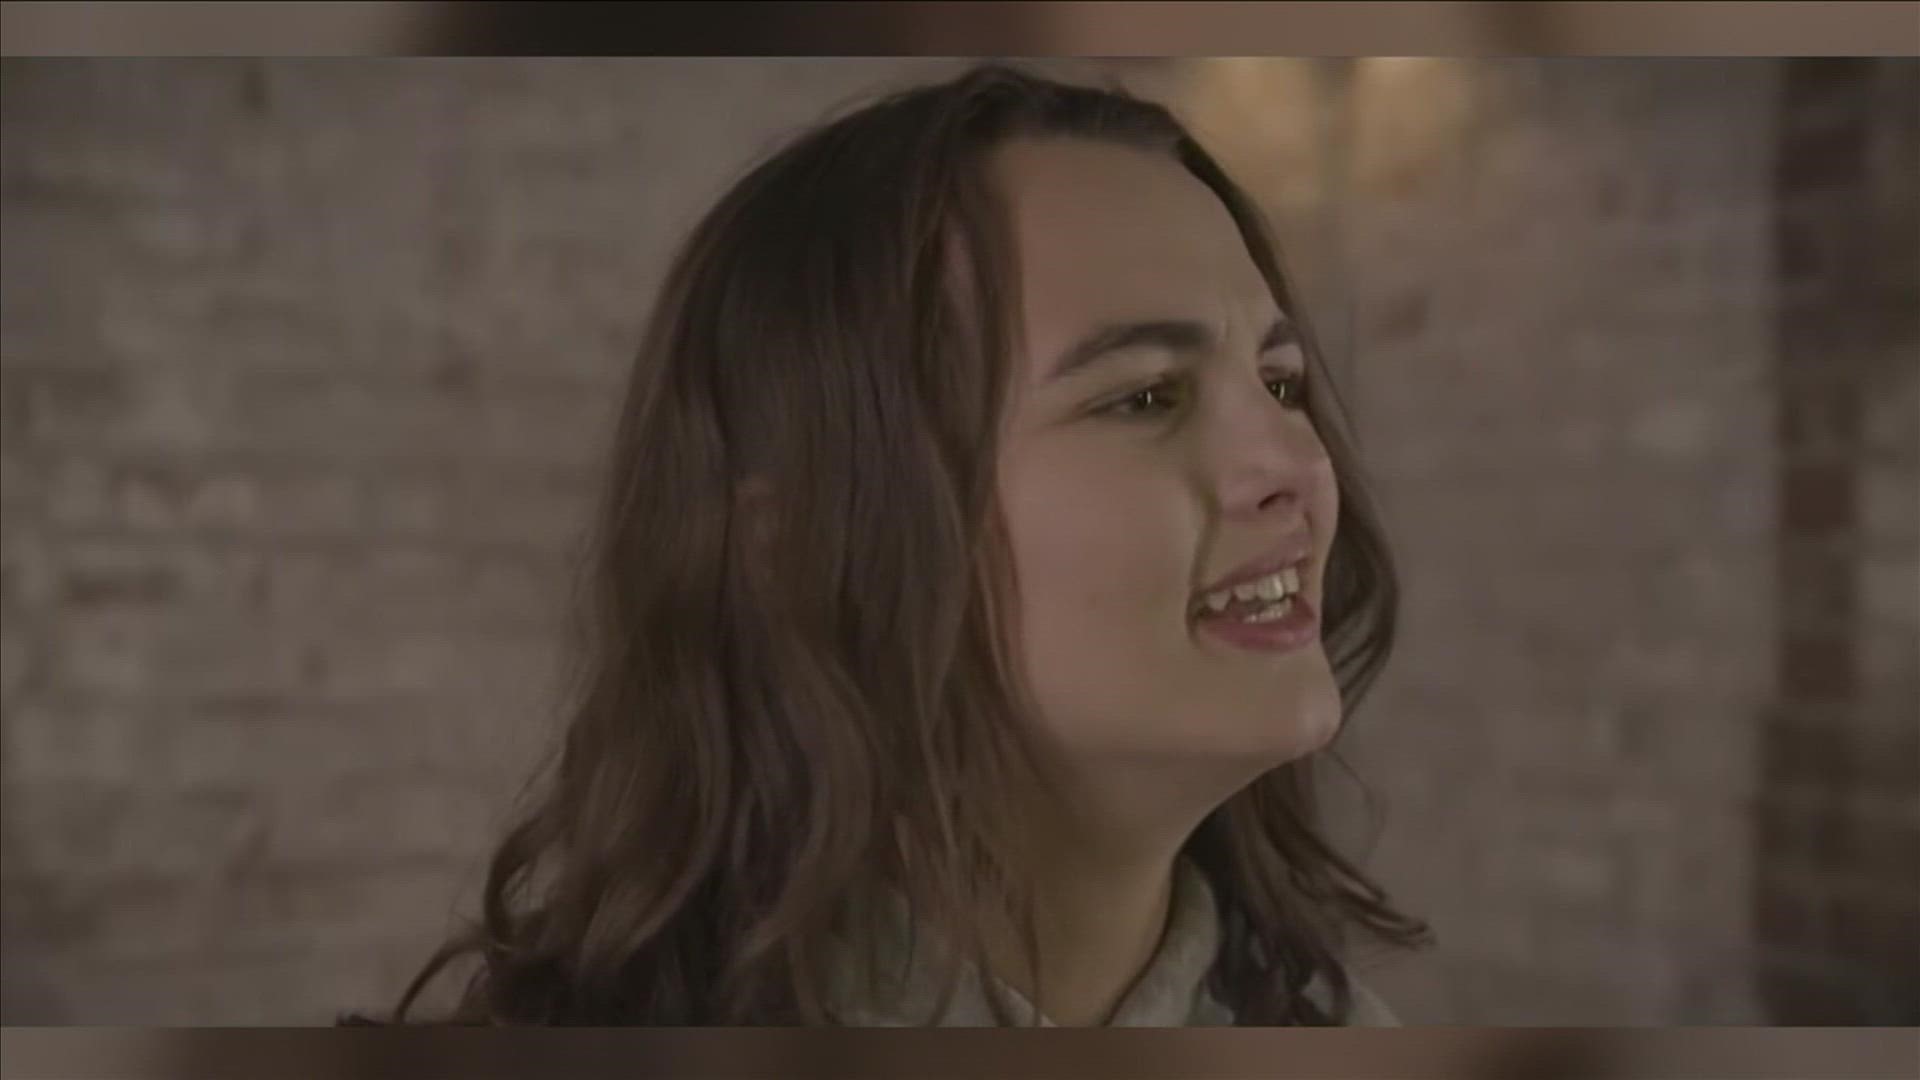 Brooke Fair is releasing a new song for mental health awareness month. The 17-year-old was named 2019 Songwriter of the Year by the Memphis Songwriter Association.